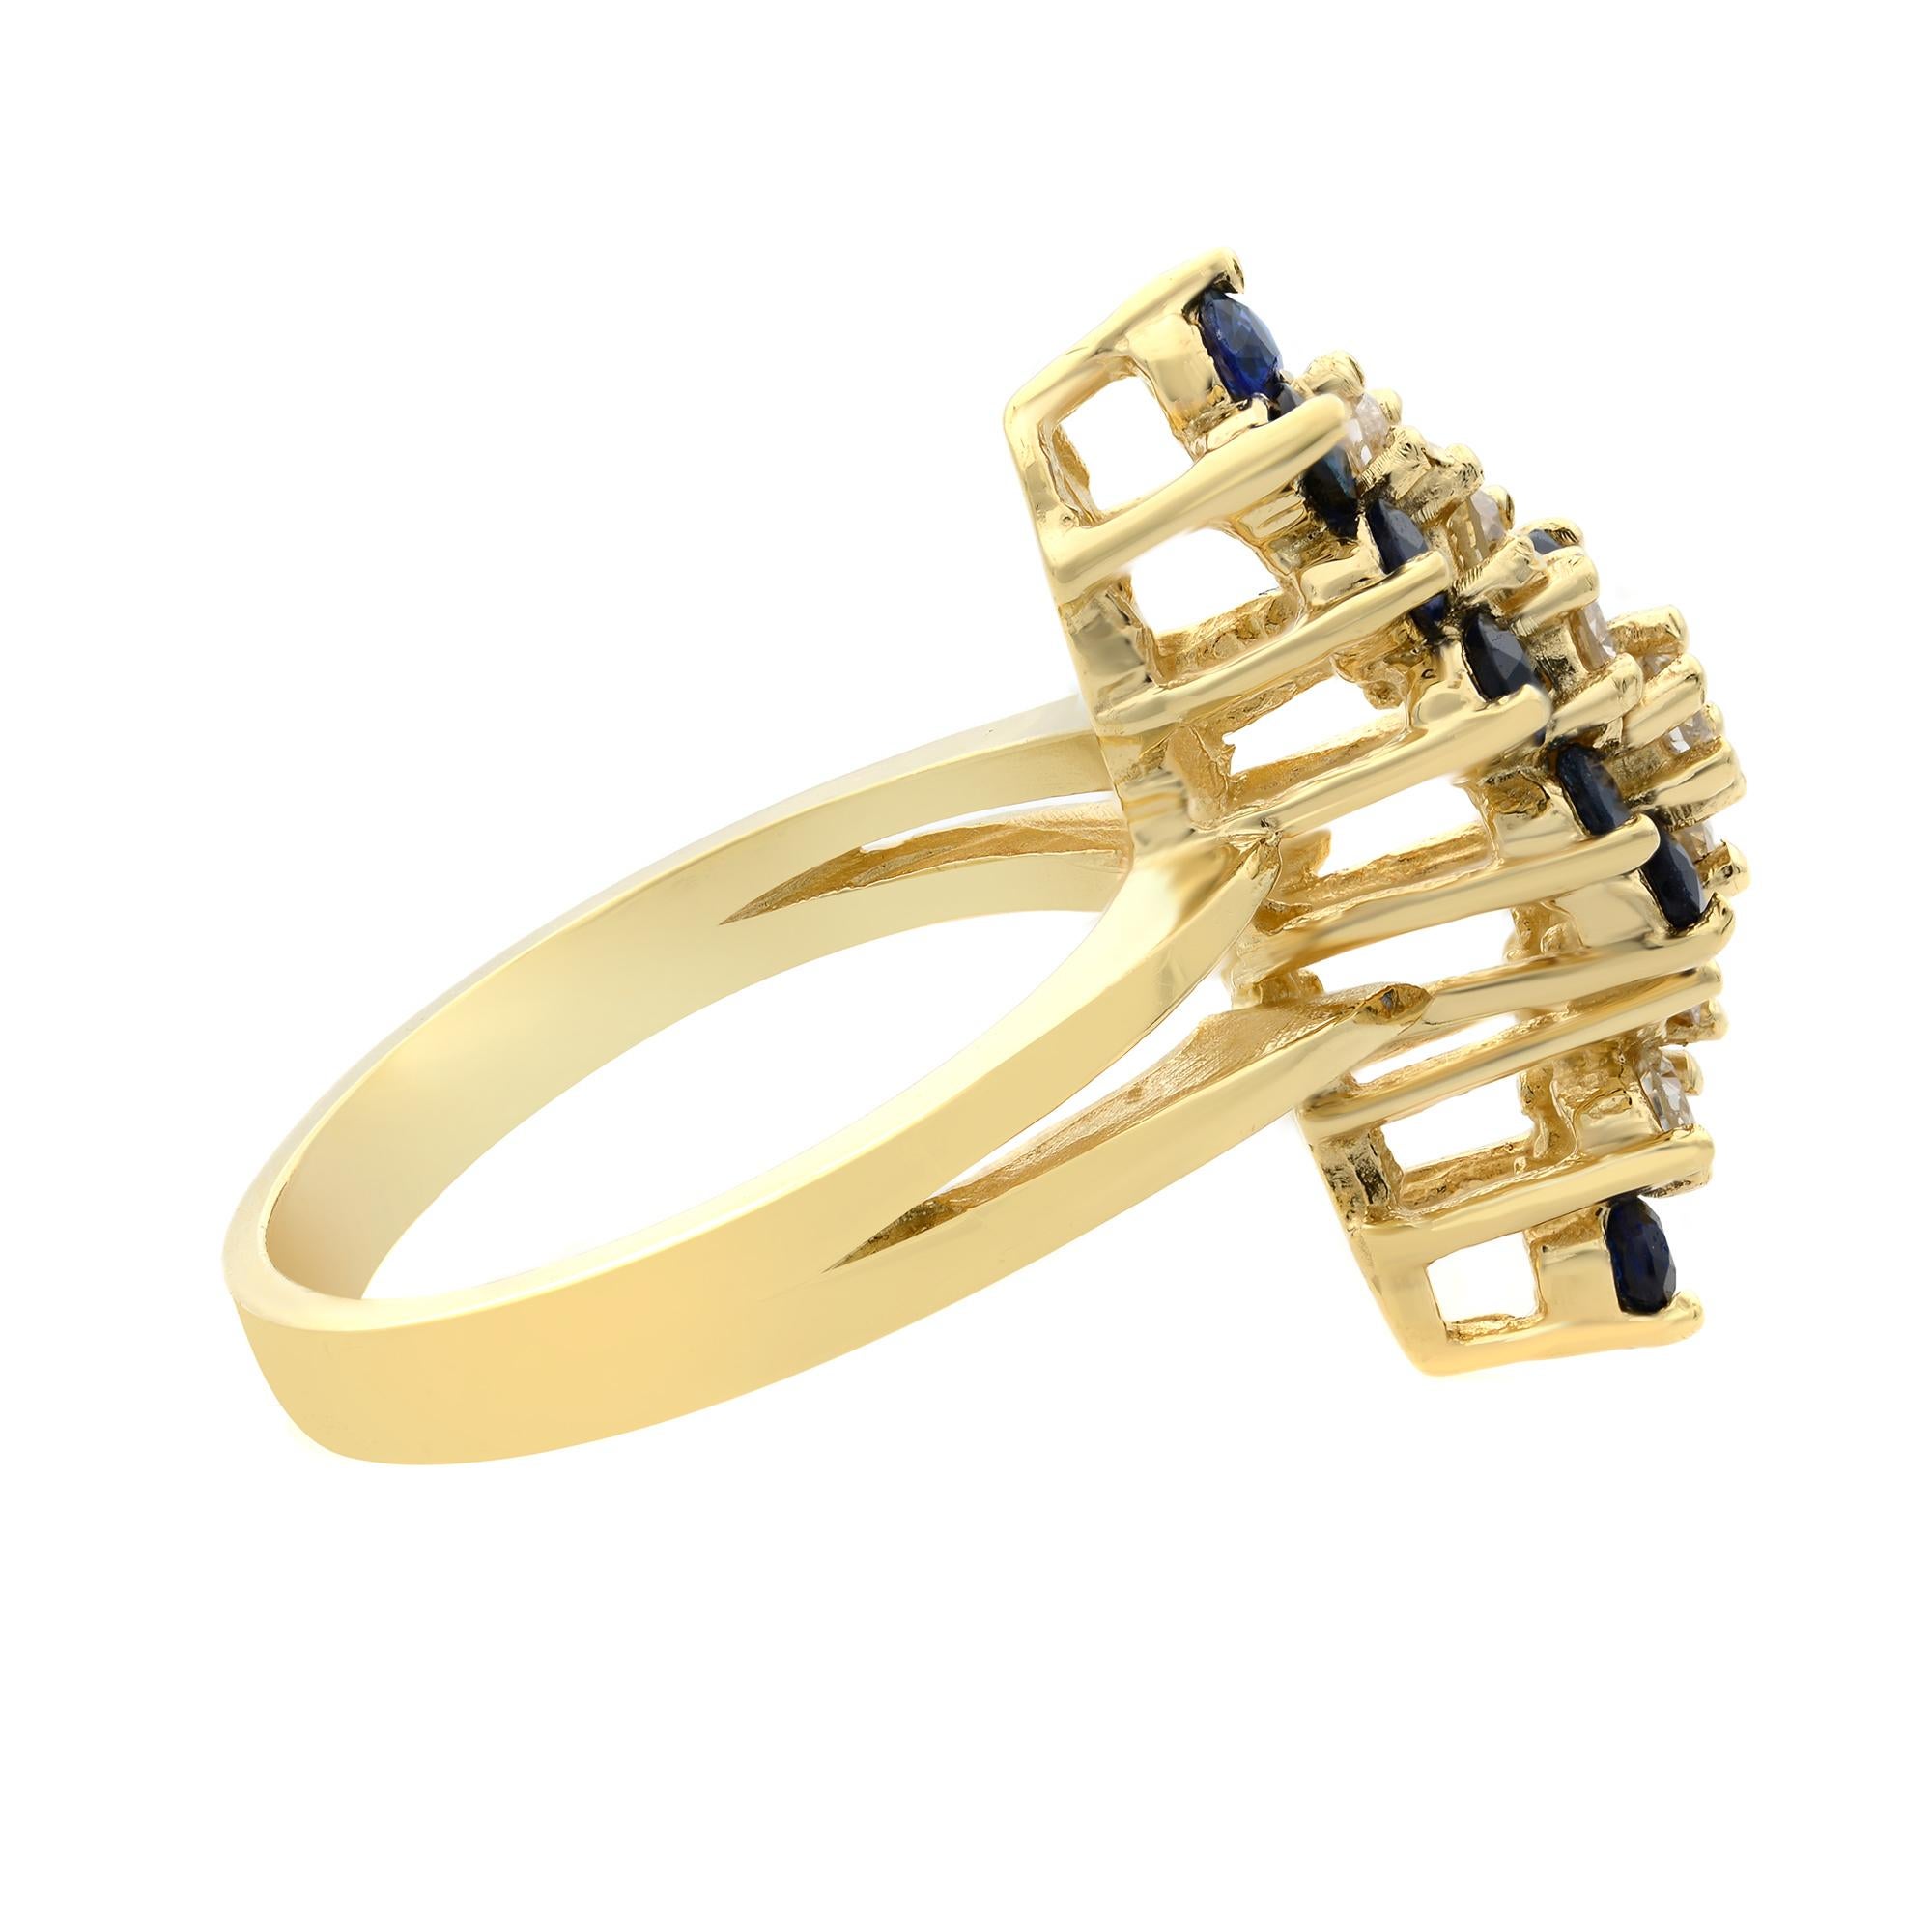 Rachel Koen Diamond & Blue Sapphire Ladies Cocktail Ring 14K Yellow Gold In Excellent Condition For Sale In New York, NY